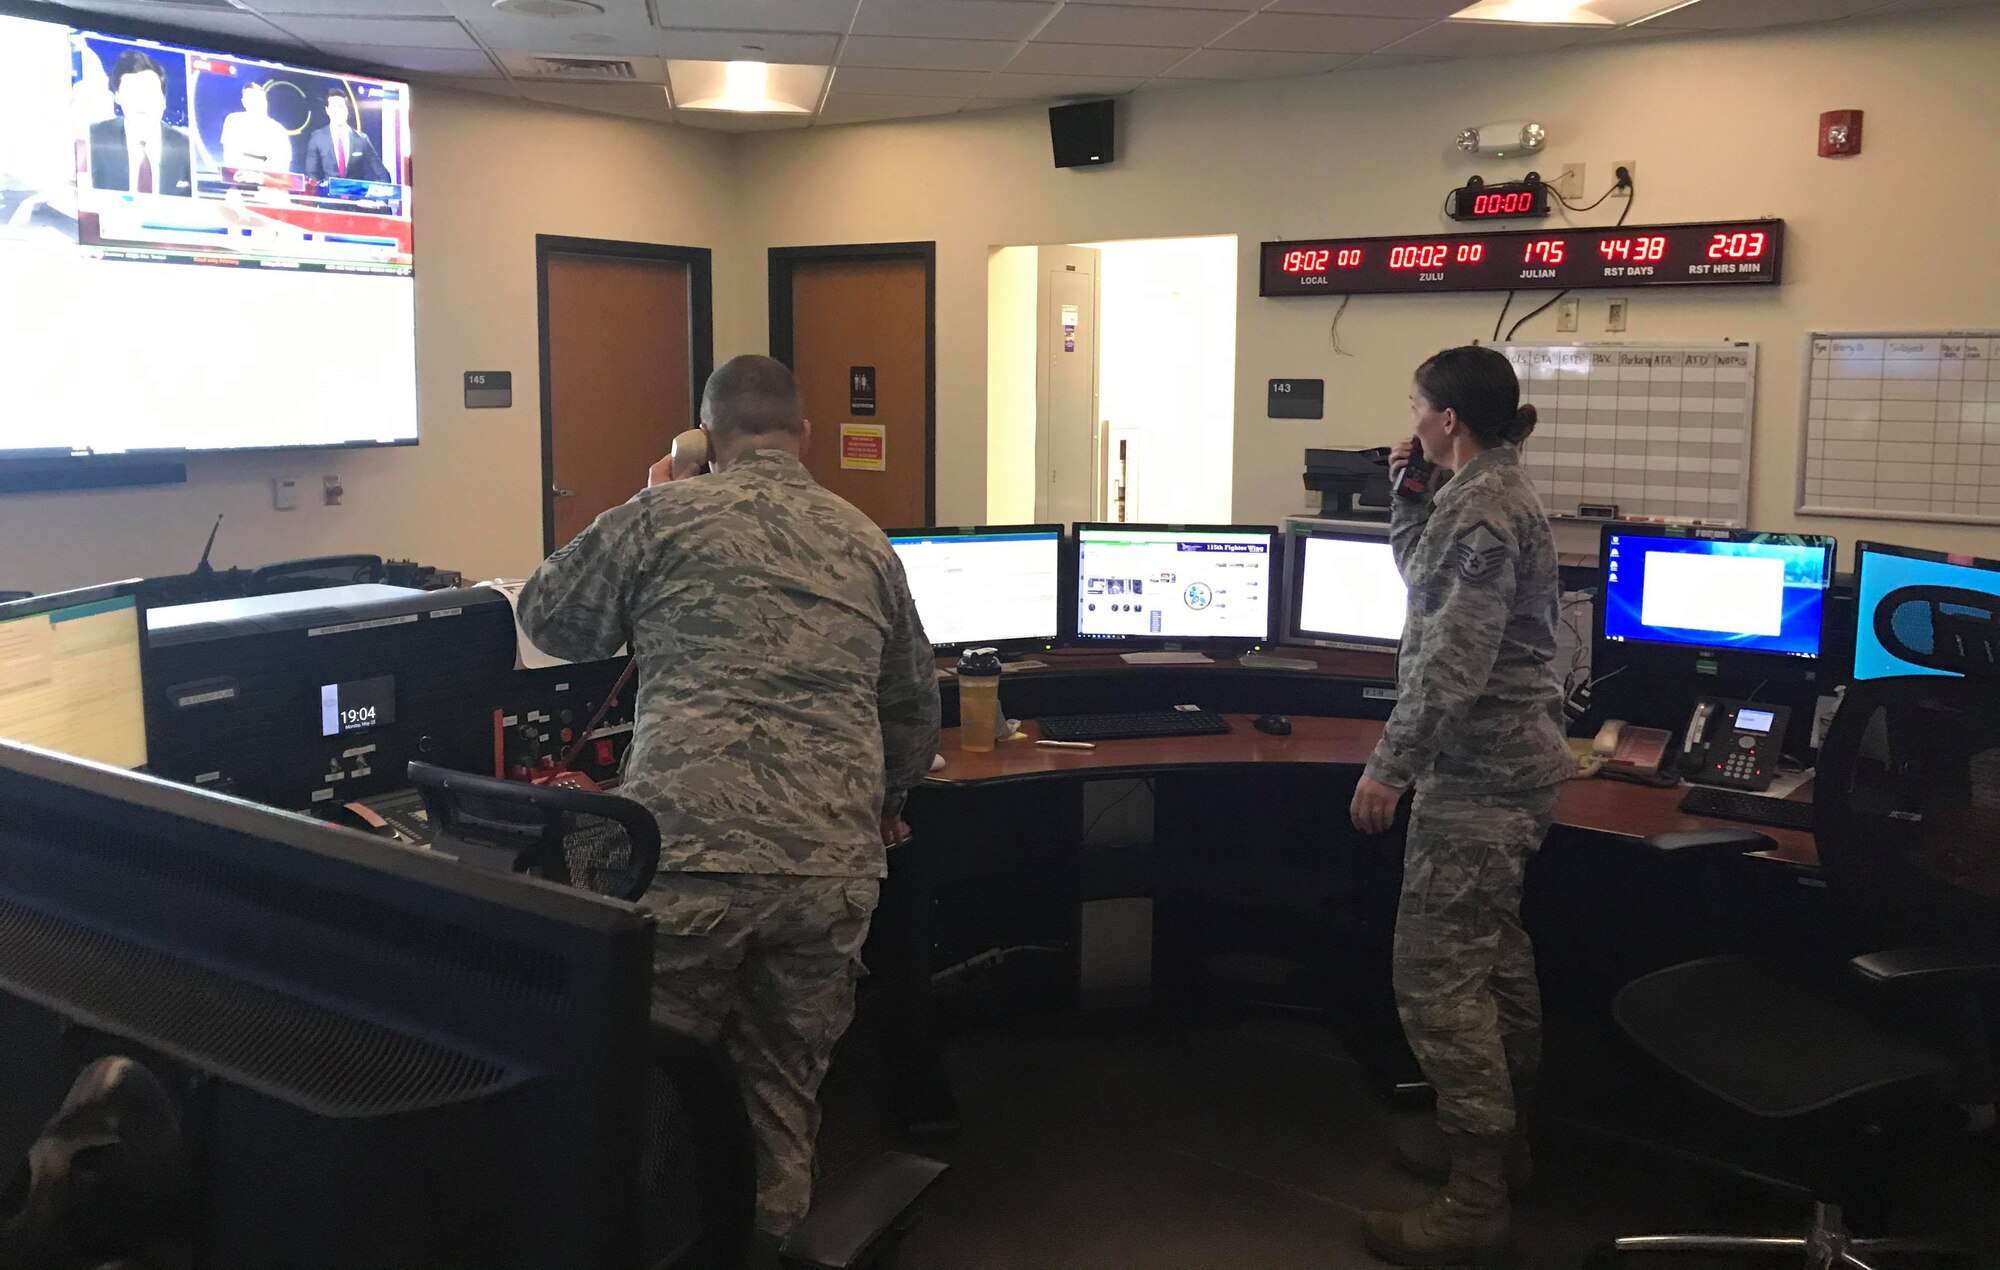 Command and control operations specialists work in the command post on base during the COVID-19 pandemic.